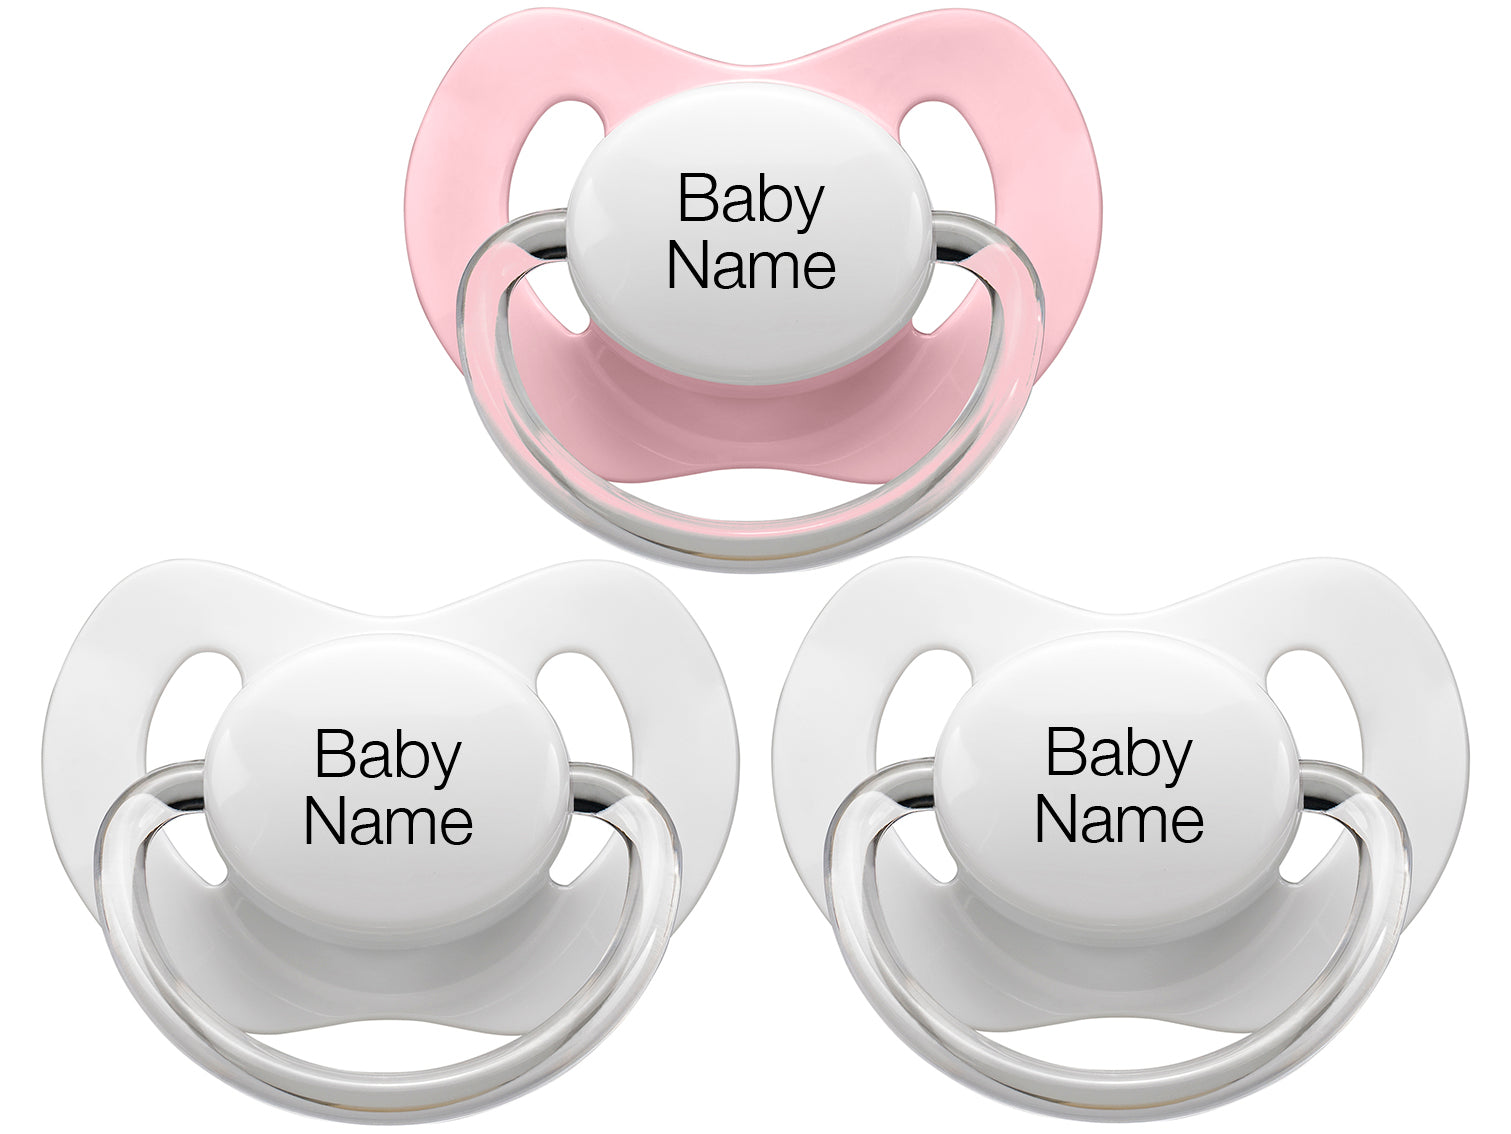 Personalised Pacifiers 3 pcs. White/Pink